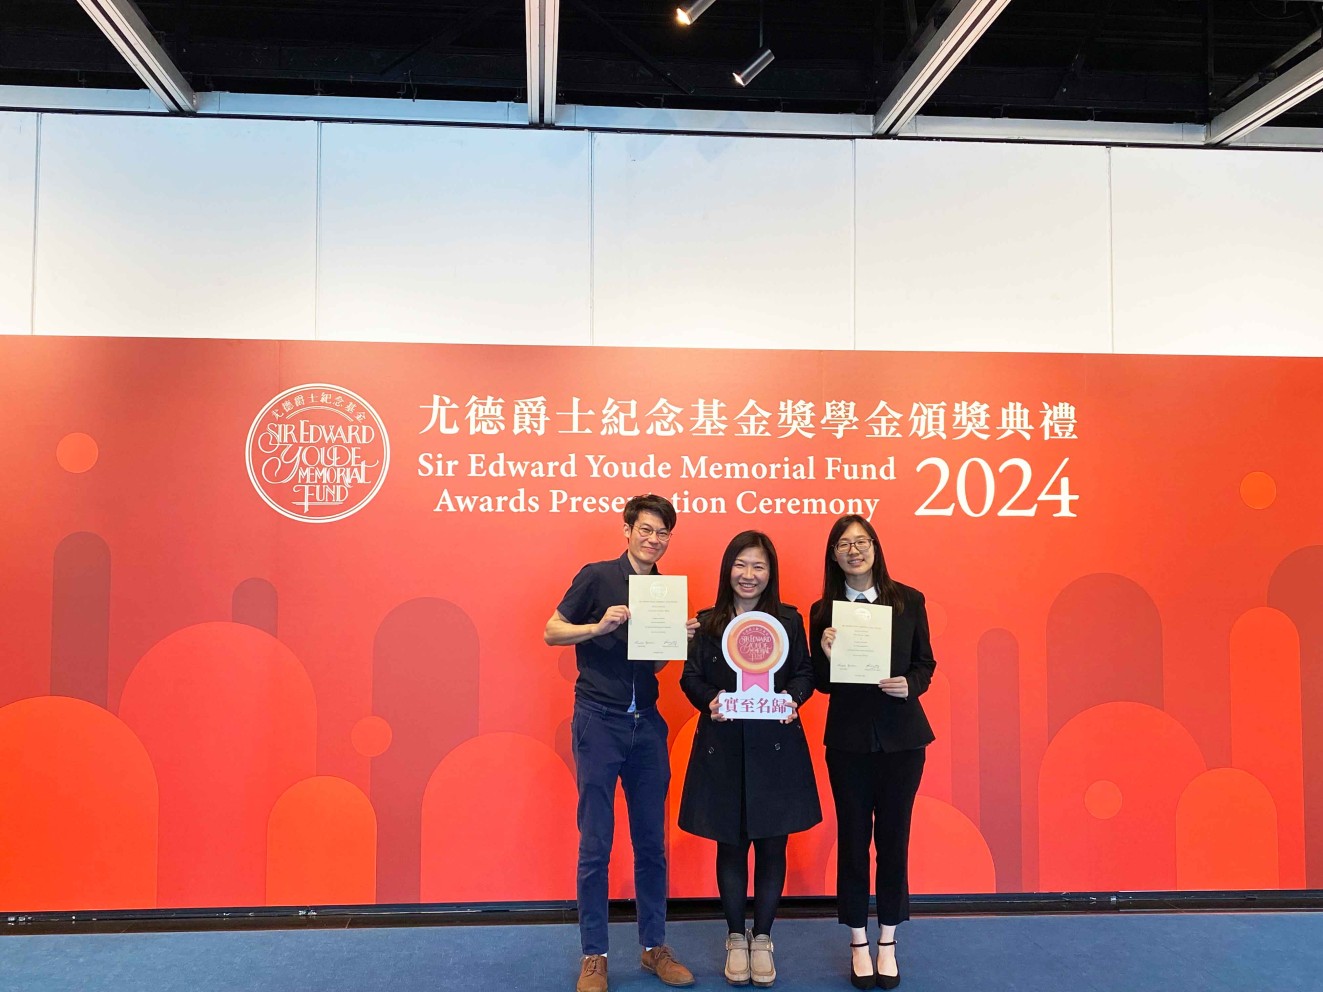 The two Lingnan winners, accompanied by Ms Connie Wong Lai-chu, Associate Director of Students Affairs (middle), attend the 37th Awards Presentation Ceremony of the Sir Edward Youde Memorial Fund held at the Hong Kong City Hall on 24 March.